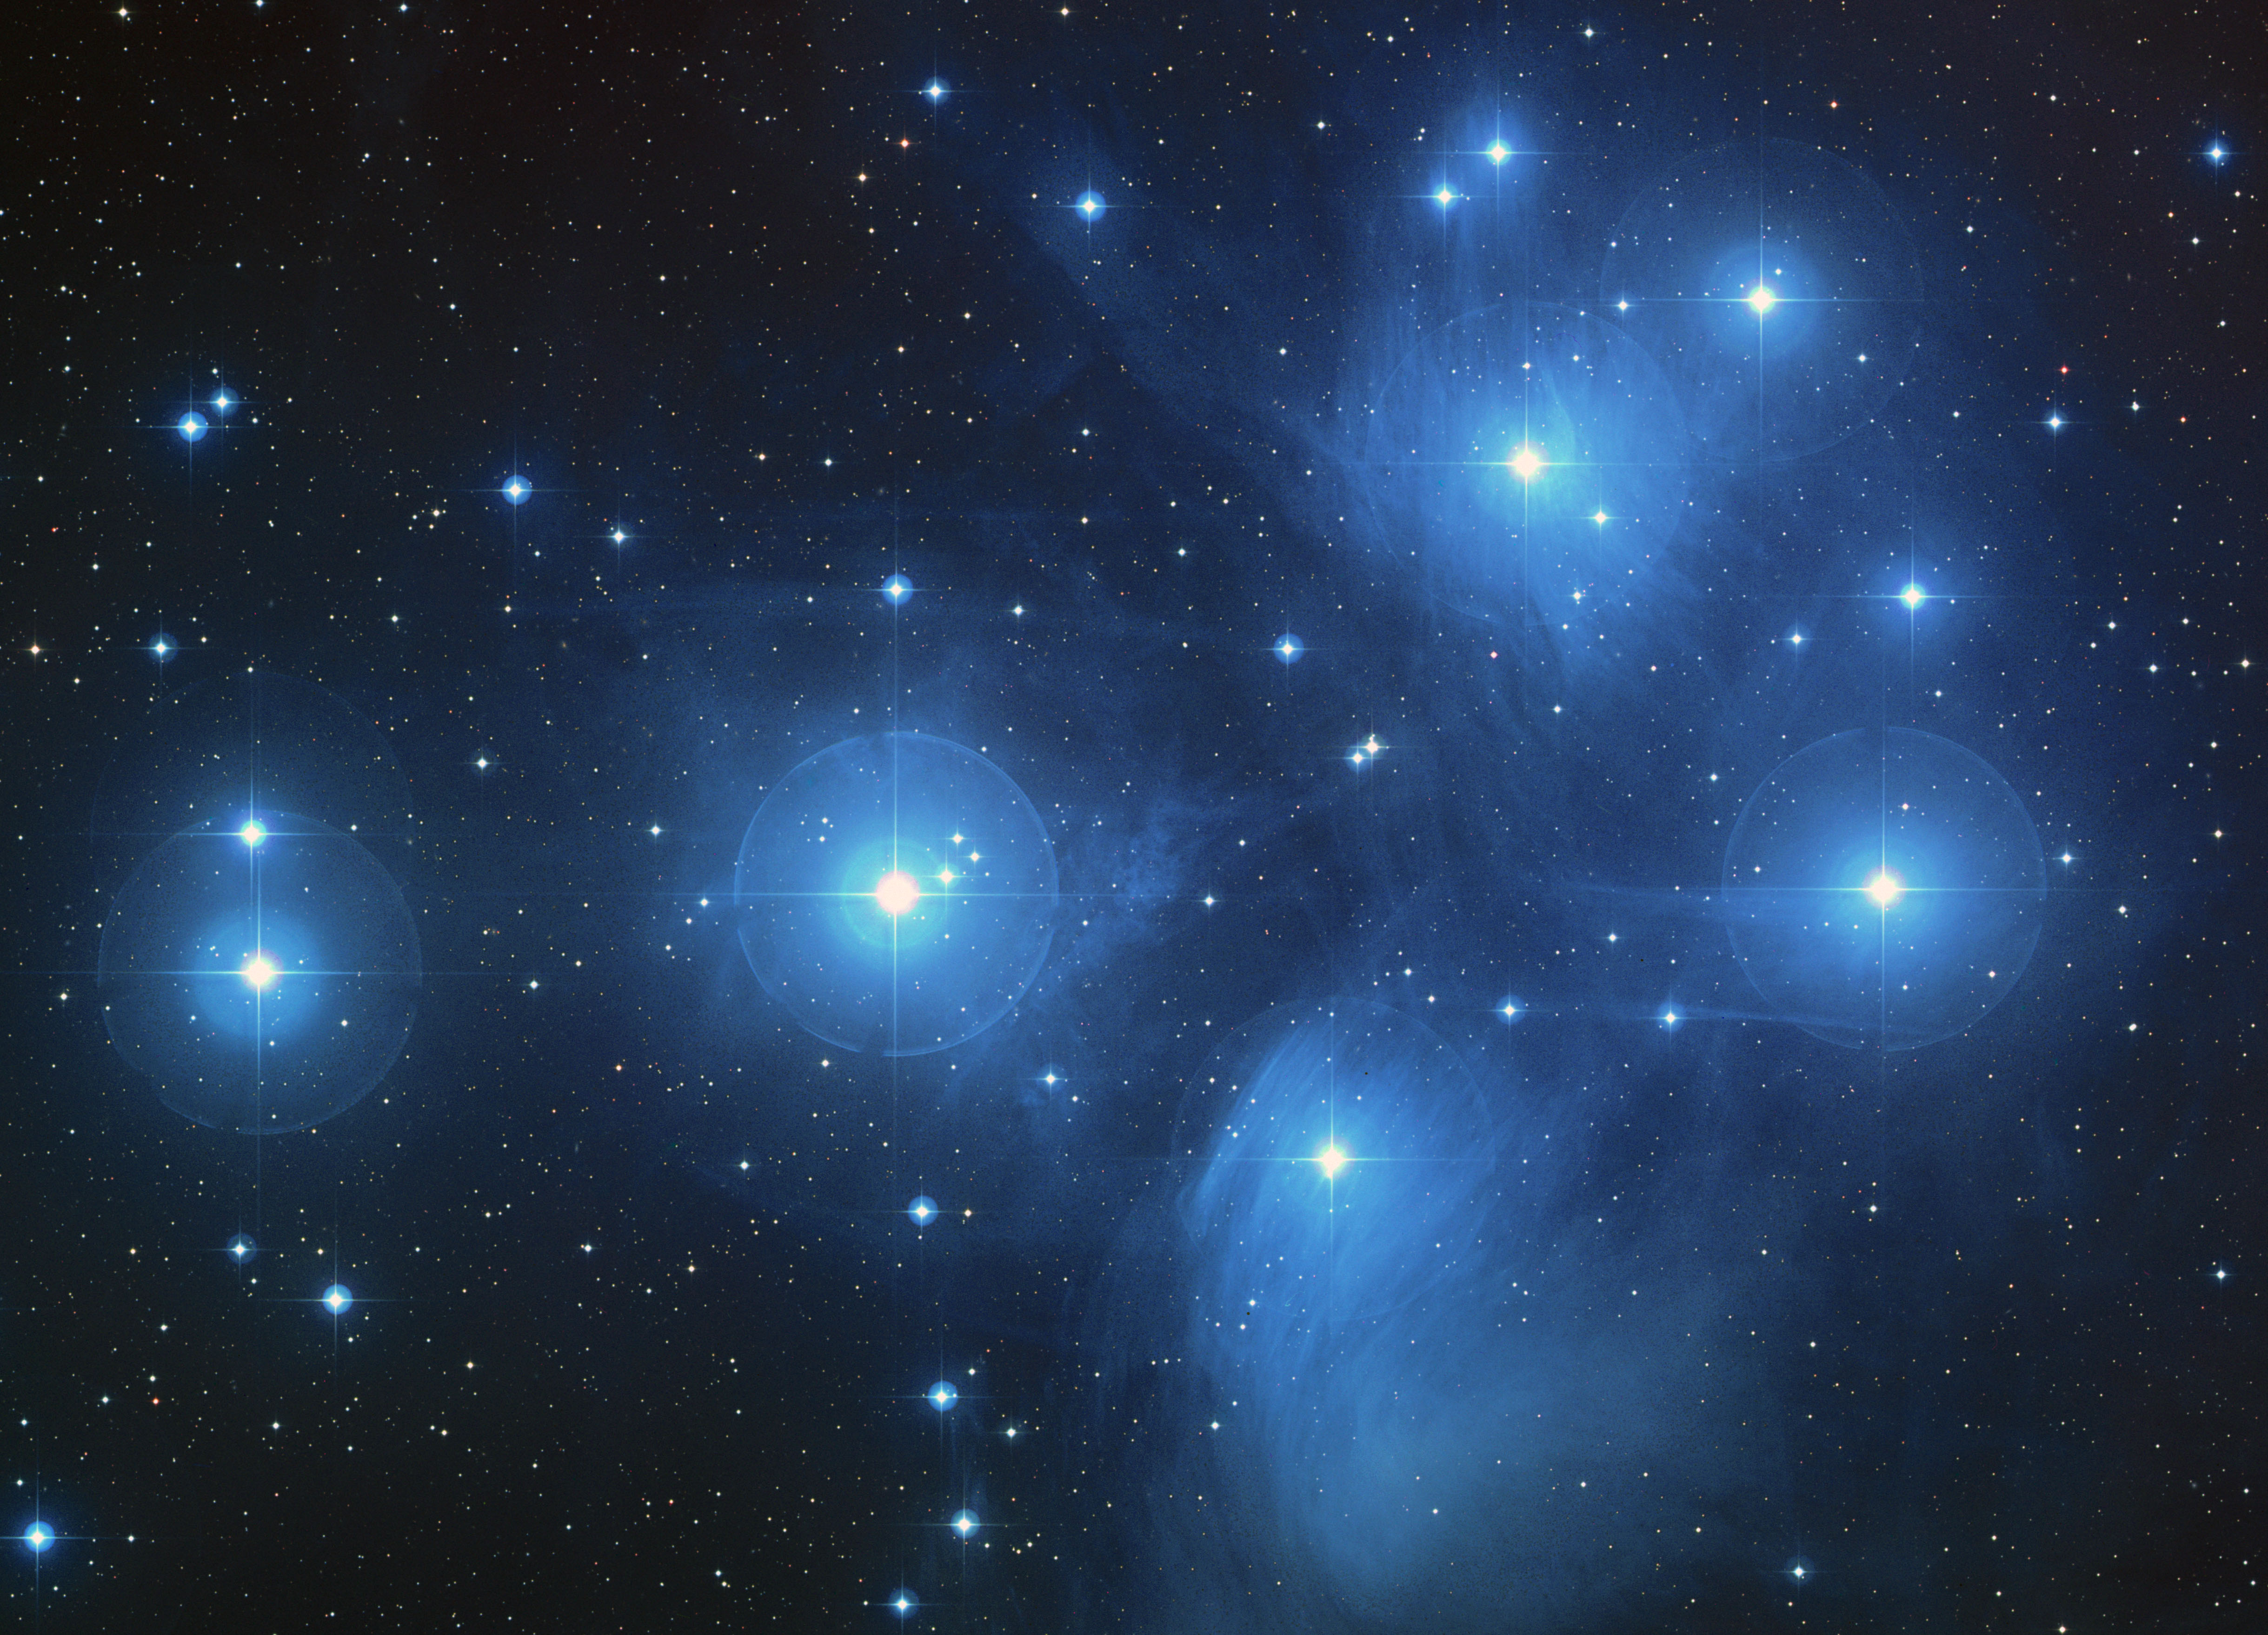 Hubble Space Telescope photograph of the Pleiades